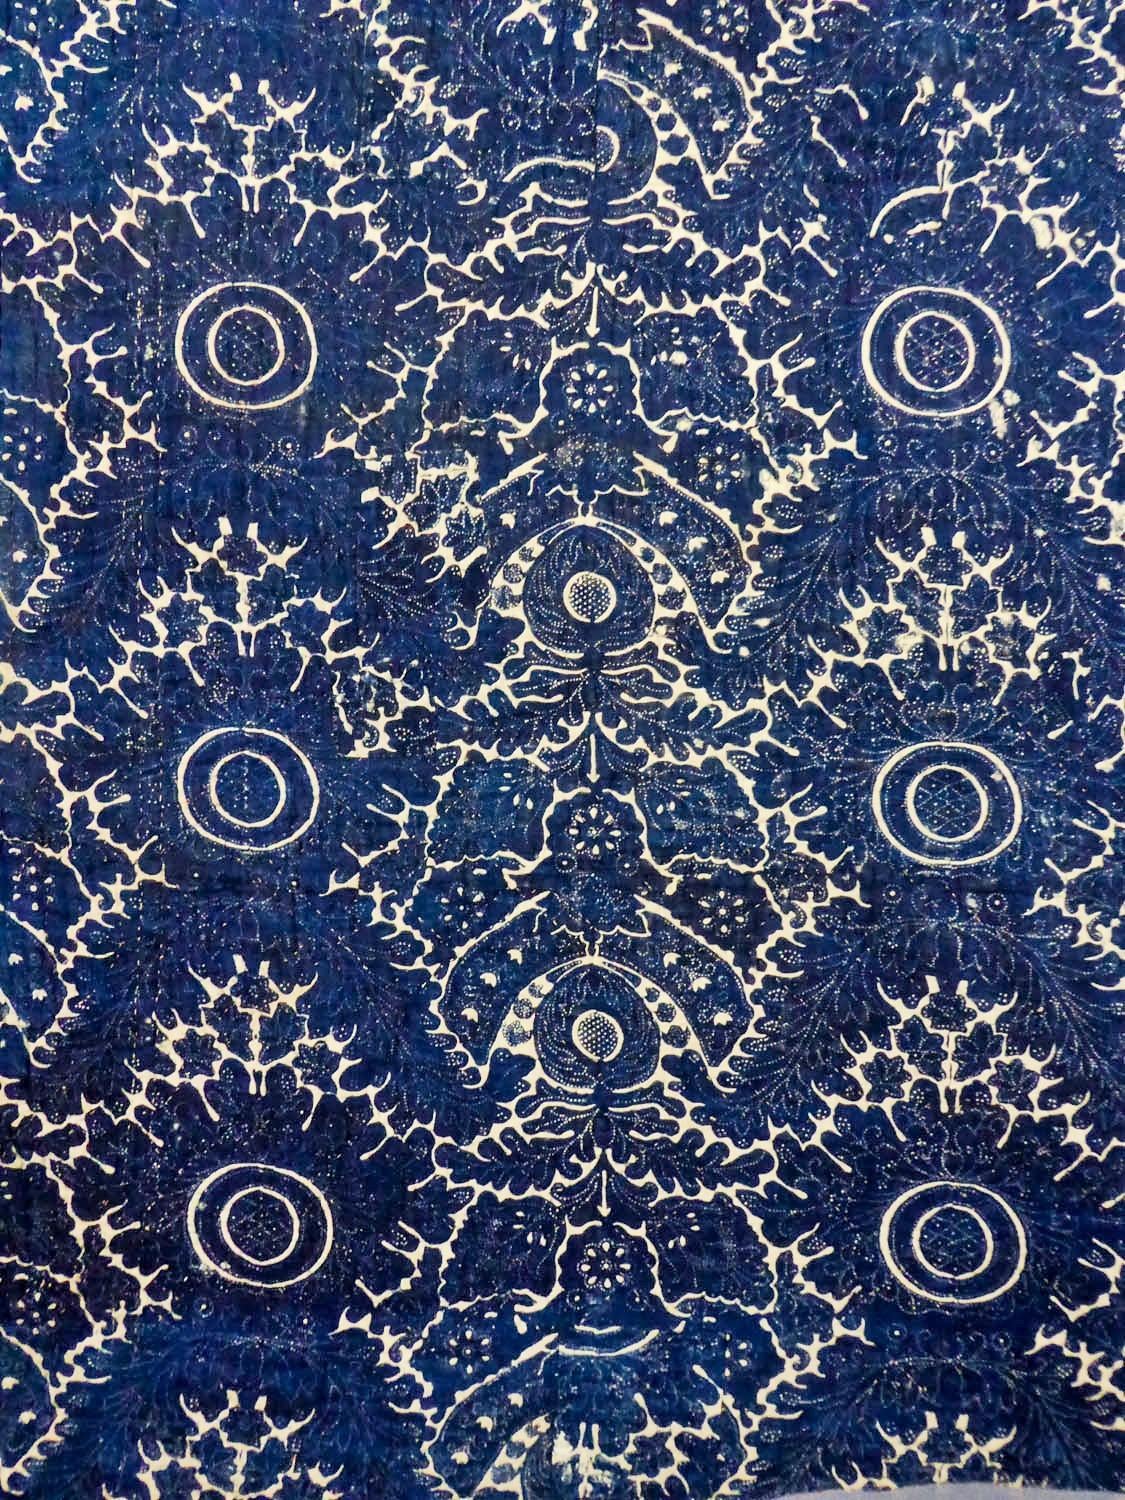 Purple A french 18th indigo wax resist-dying quilt - Provence Circa 1780